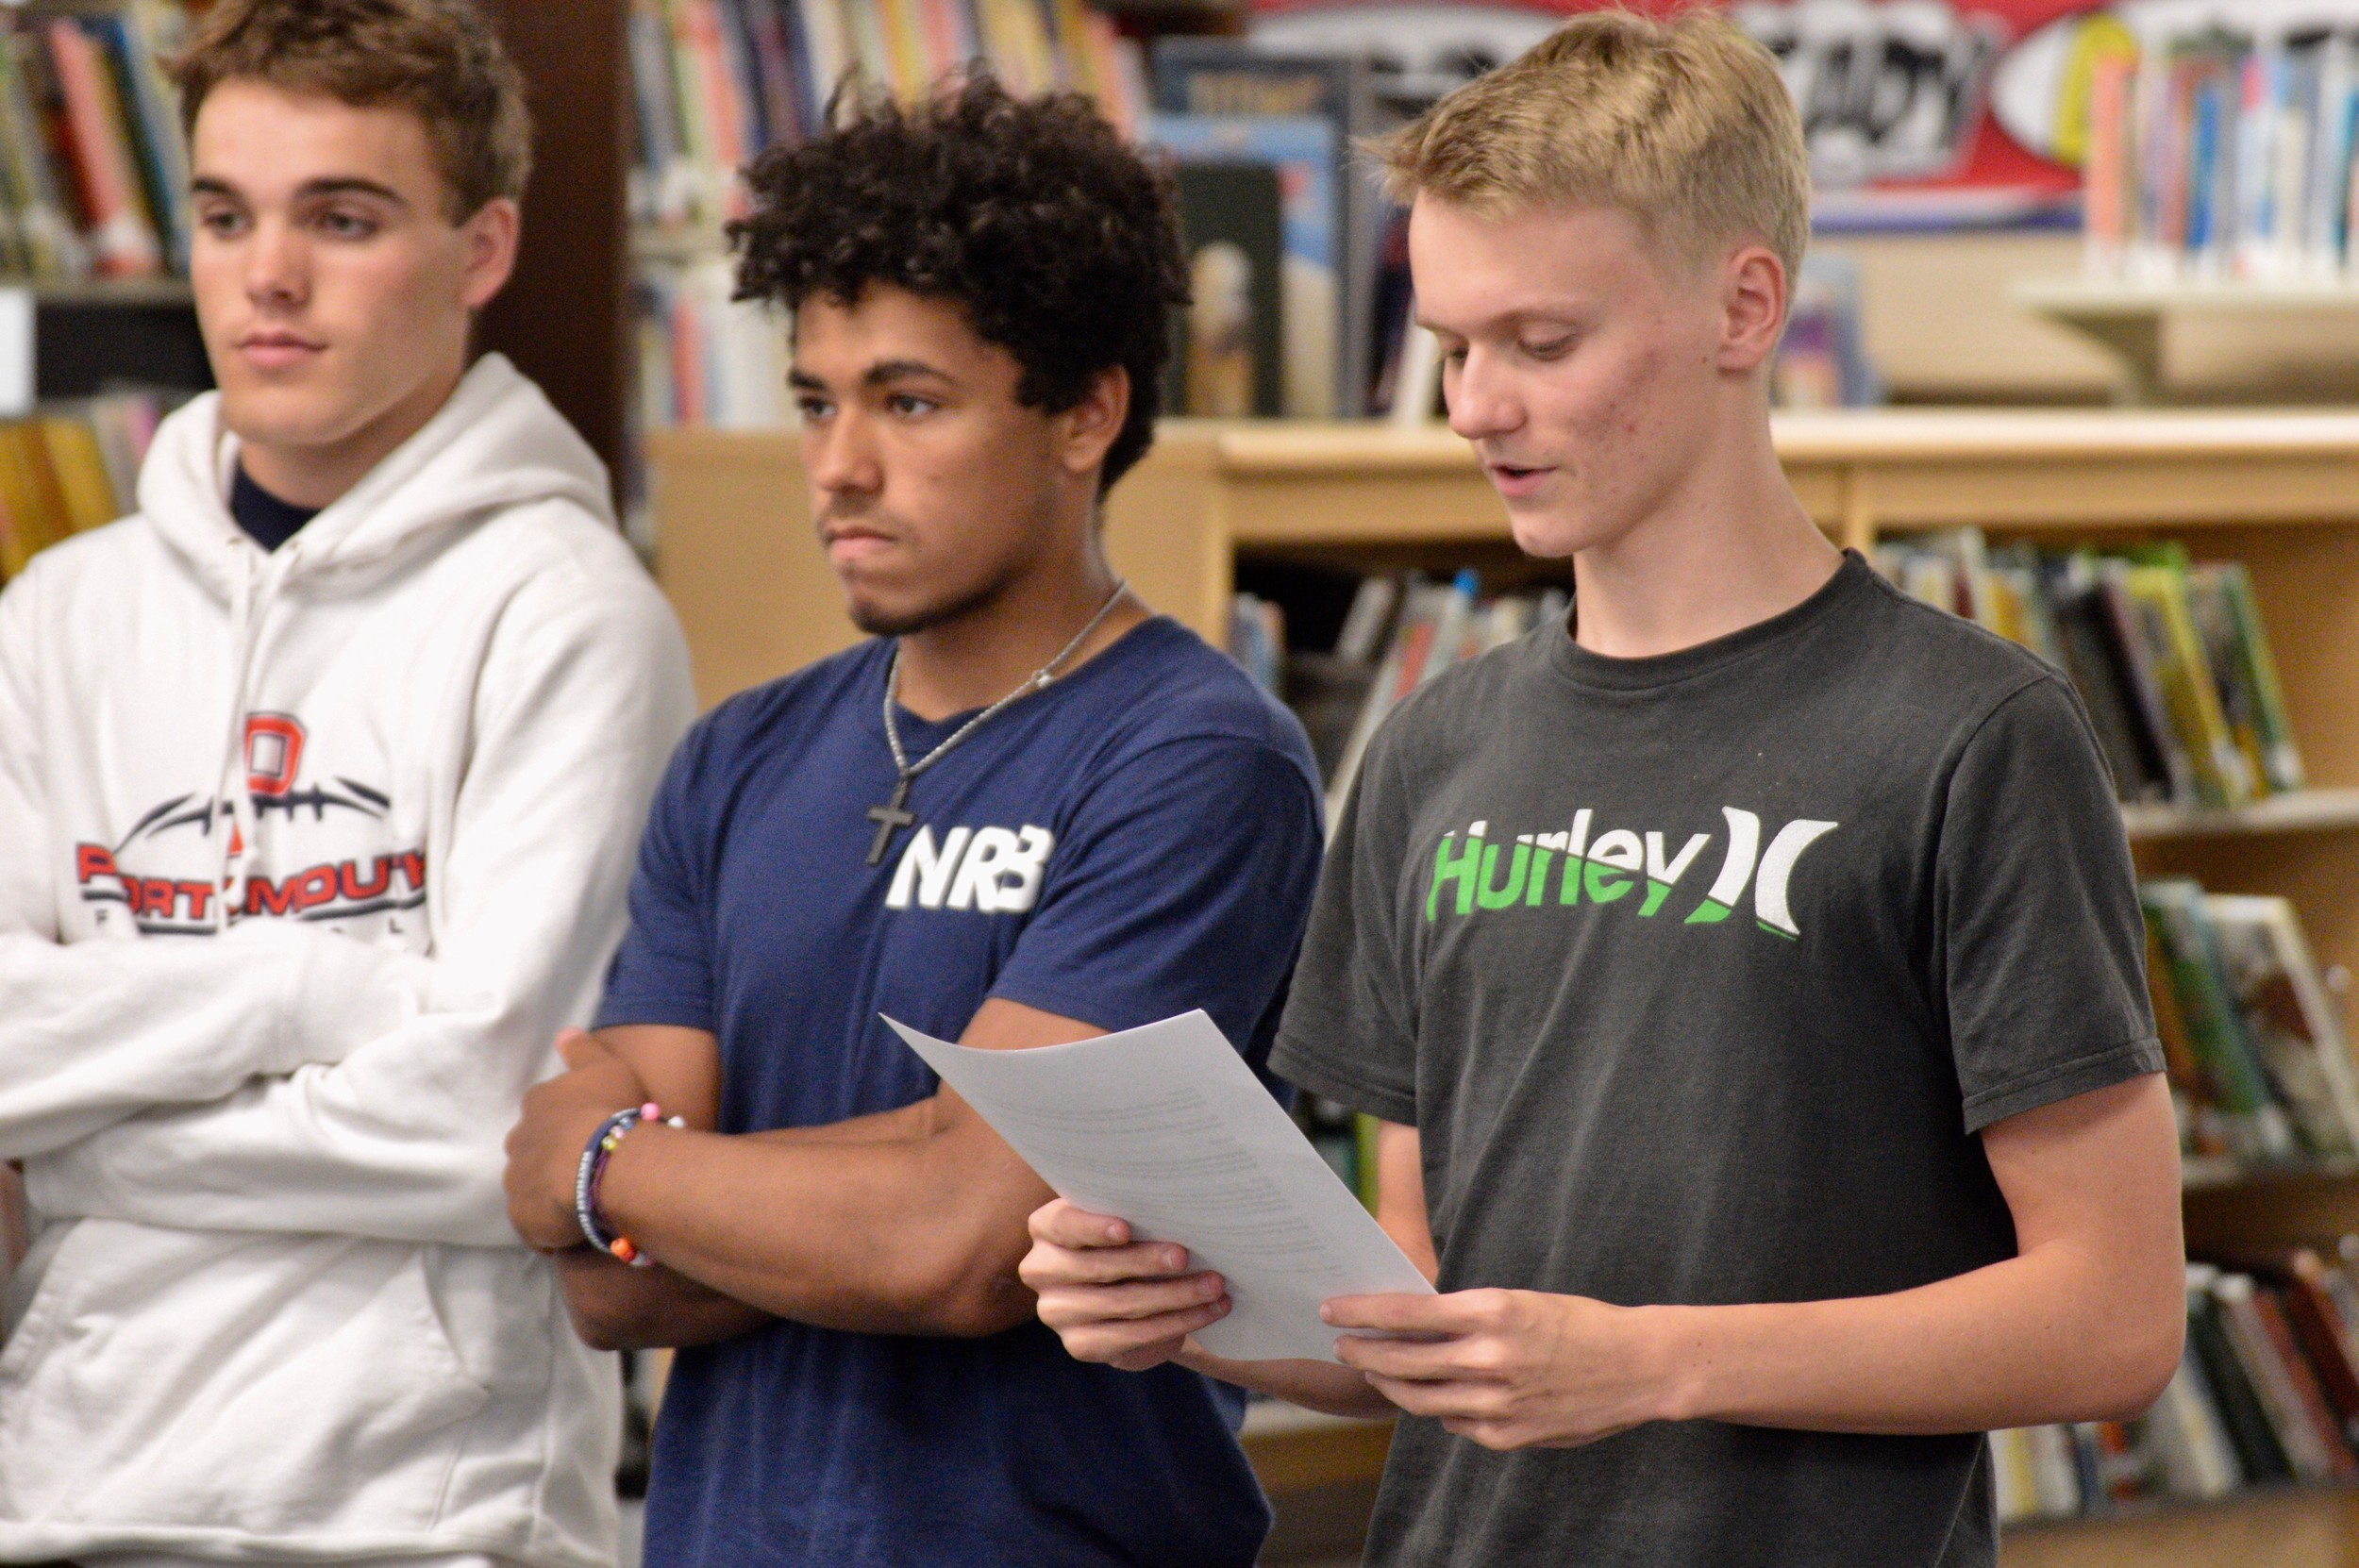 Owen Ross, a PHS junior and president of Every Student Initiative, explains how the group was formed after the suicide of their friend, Nathan Bruno, earlier this year. Connor Perry (far left) and Angel Duclos, wait their turn to speak.